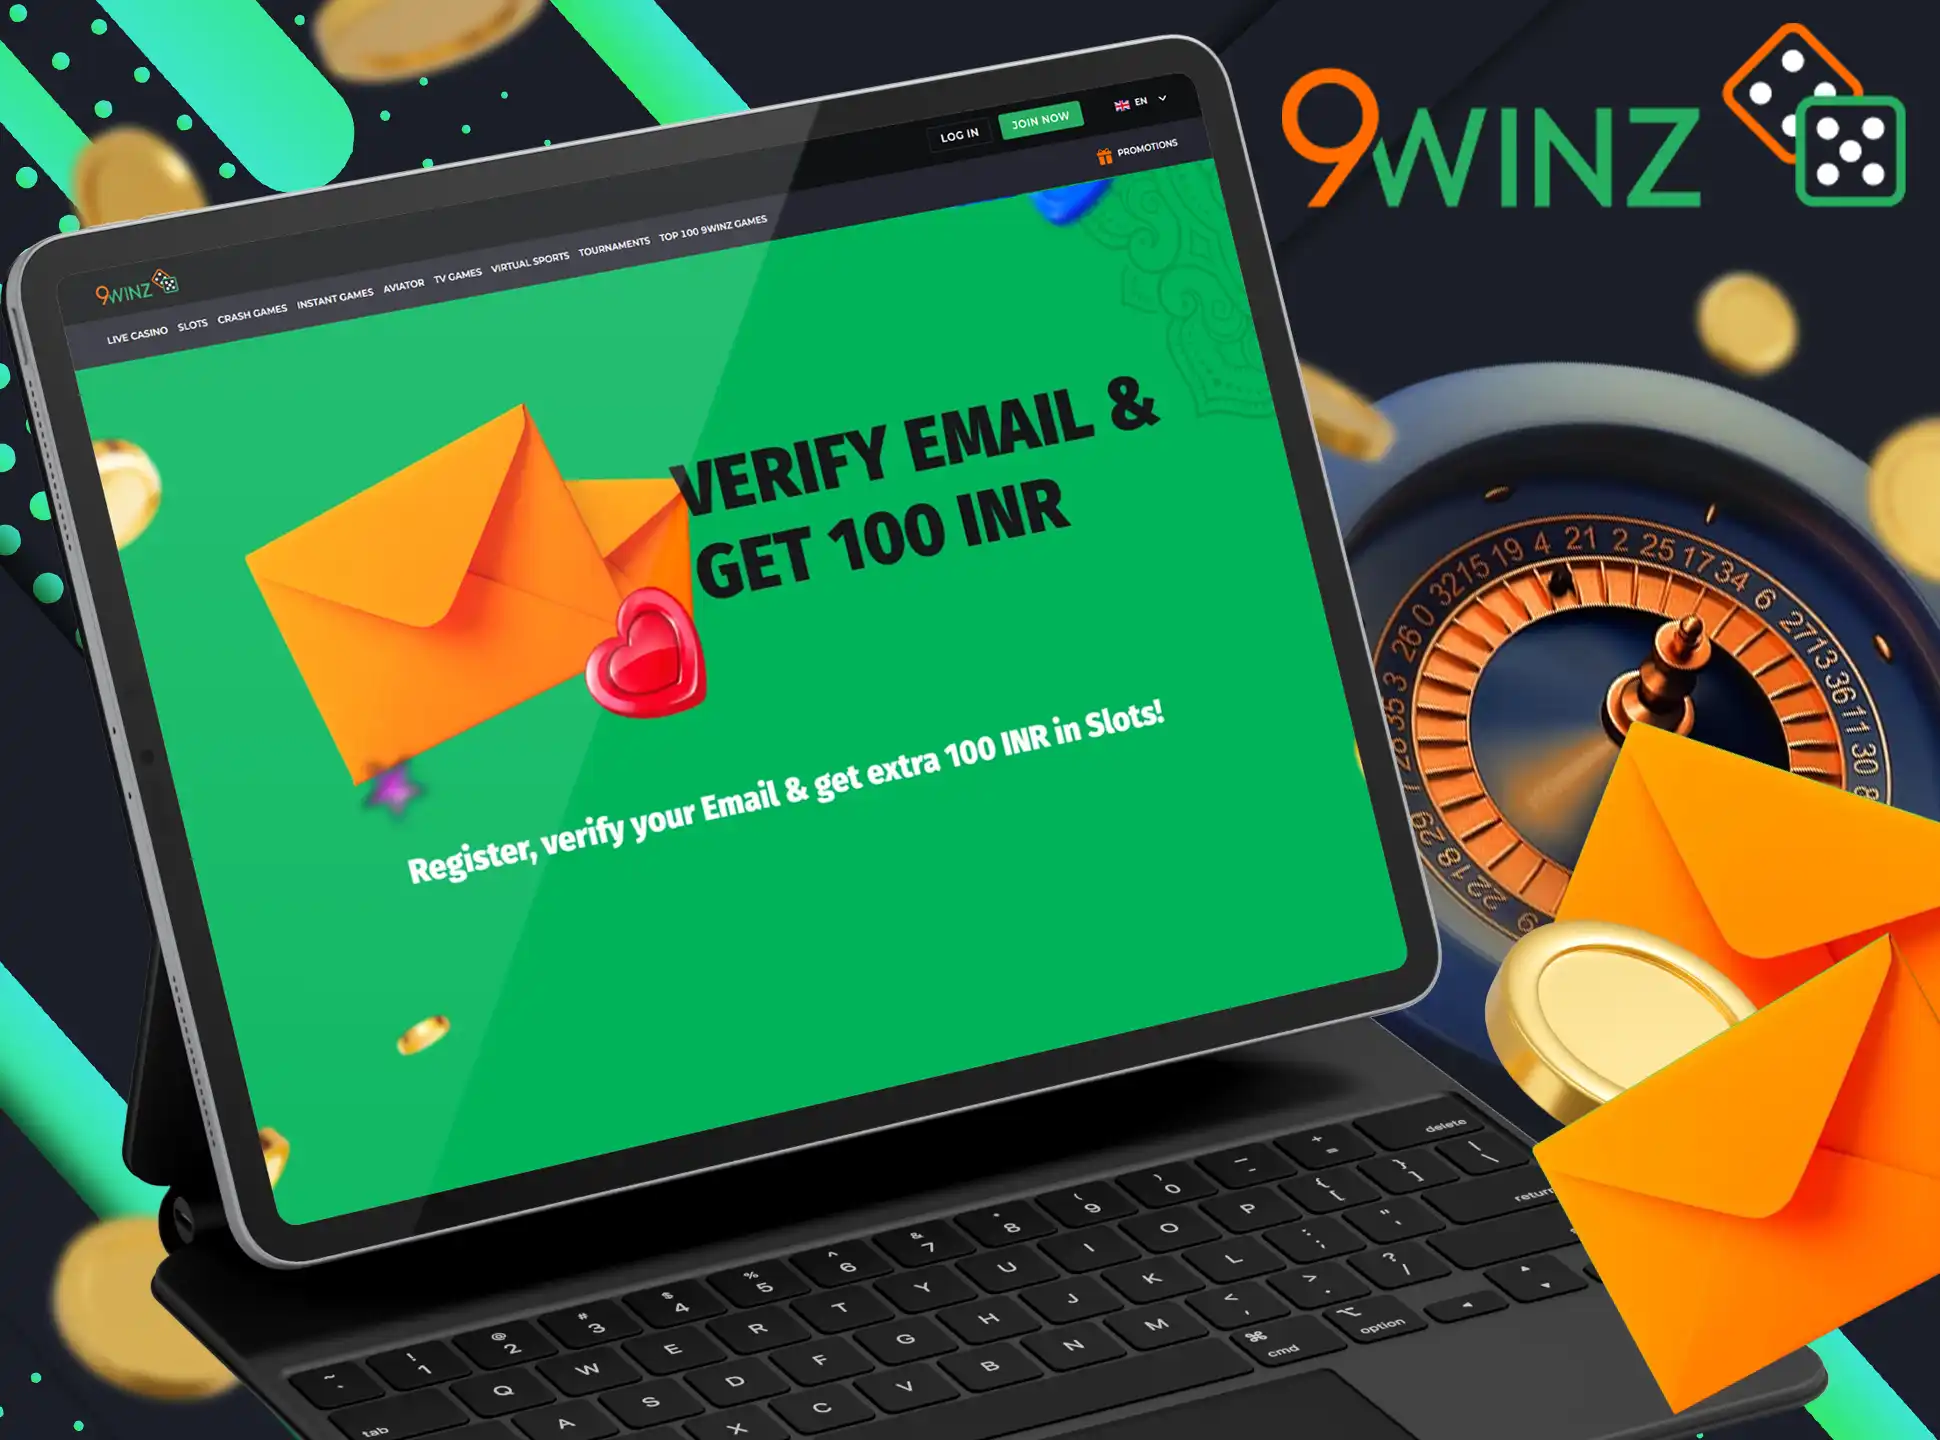 Verify your email at 9winz and get additional money.